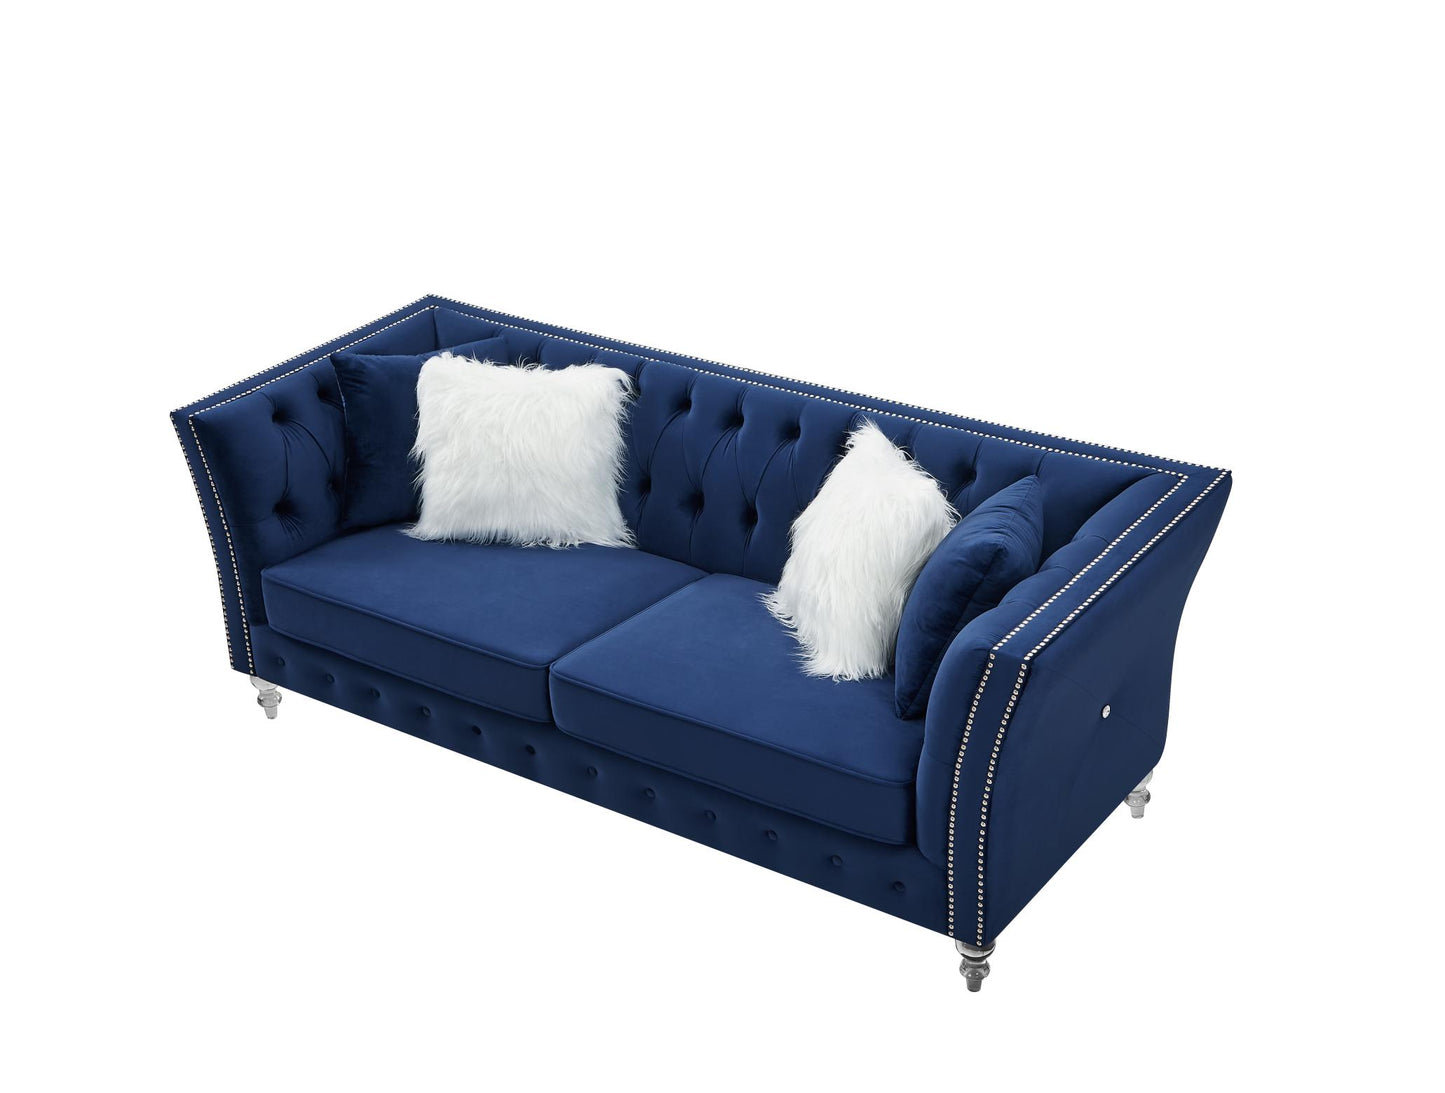 Solid Color Tufted Sofa for Living Room